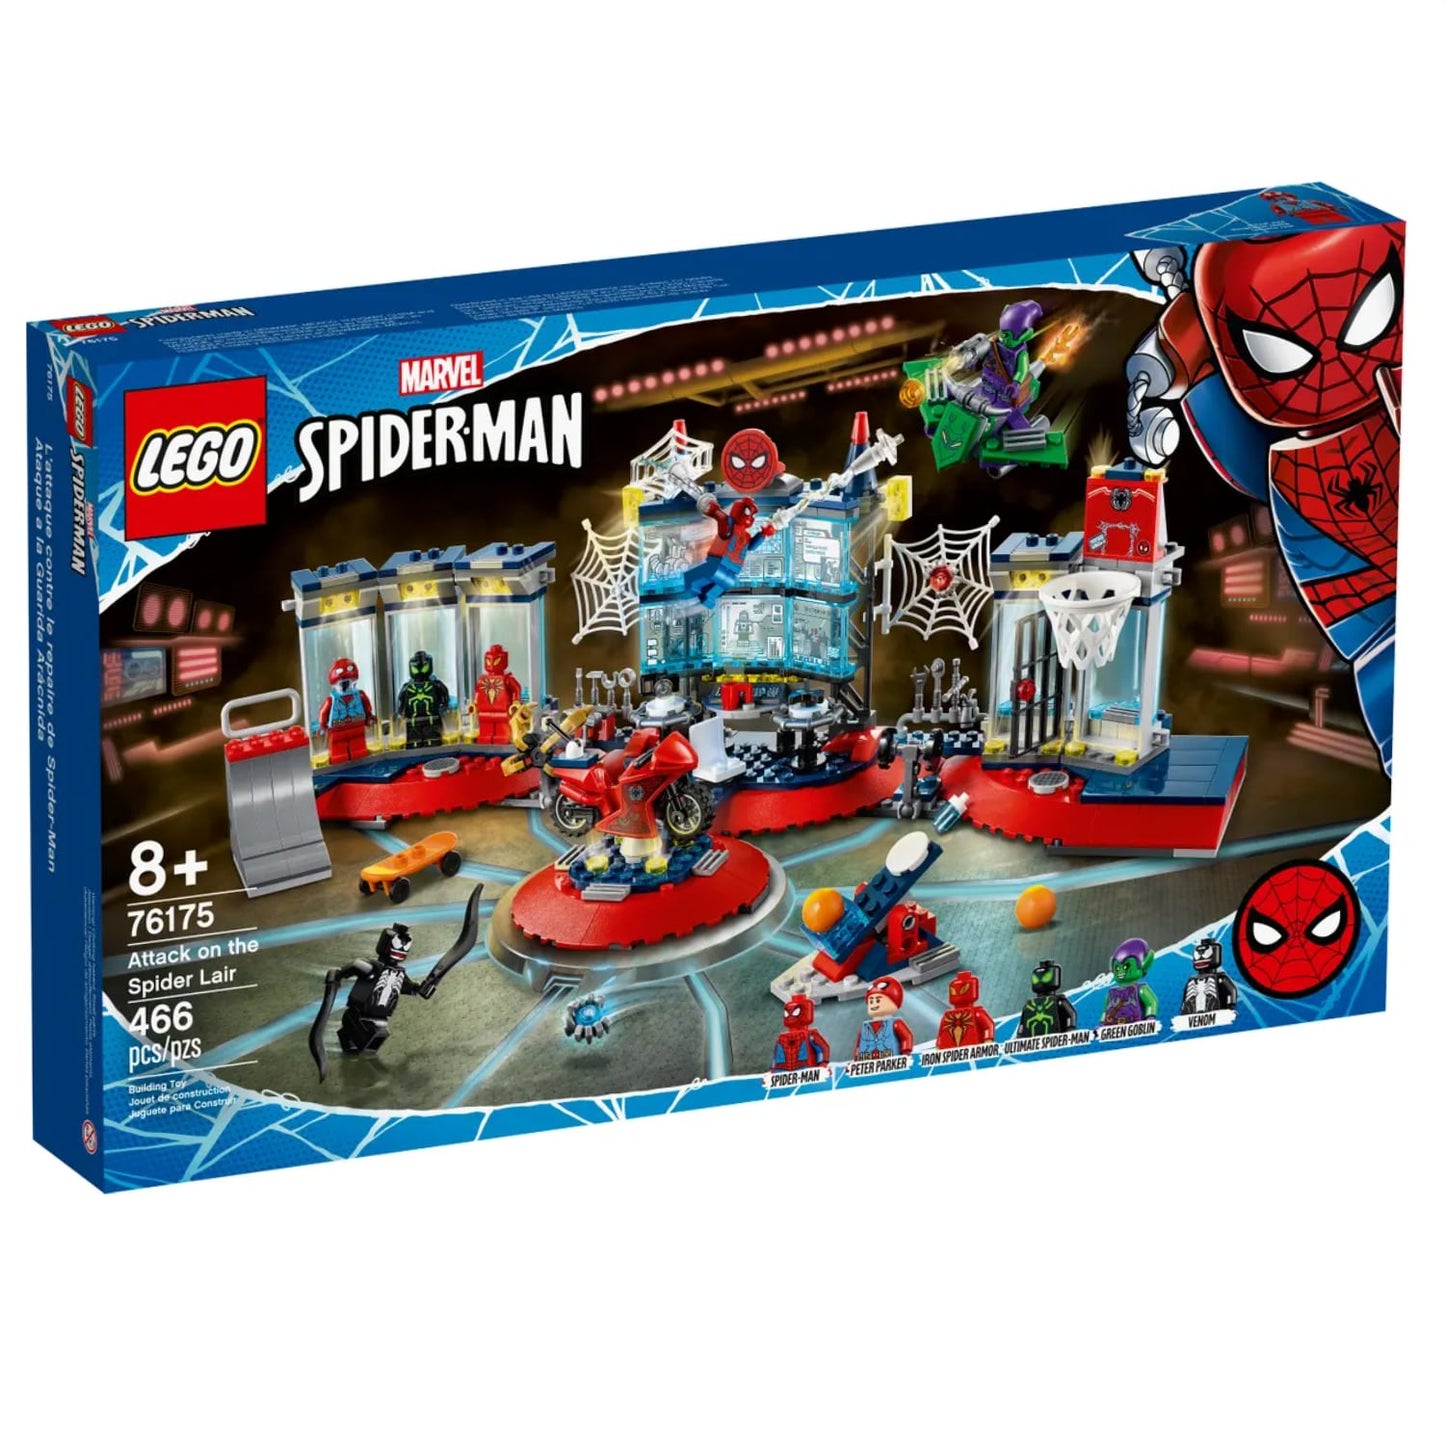 Lego 76175 Marvel Spider-Man Attack on the Spider Lair